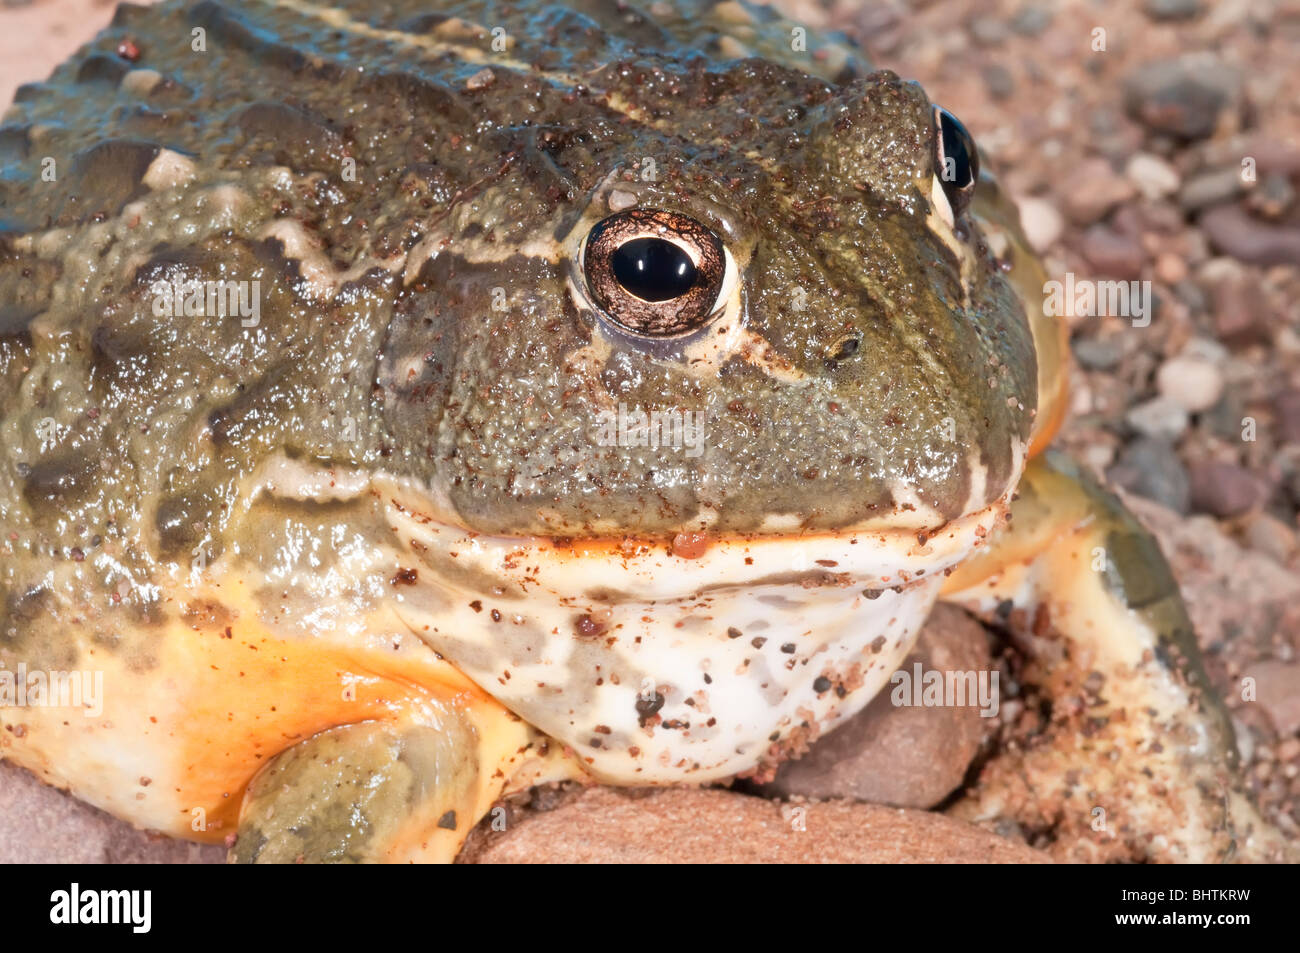 African bullfrog, Pyxicephalus adspersus, aggressive amphibian native to southern Africa Stock Photo